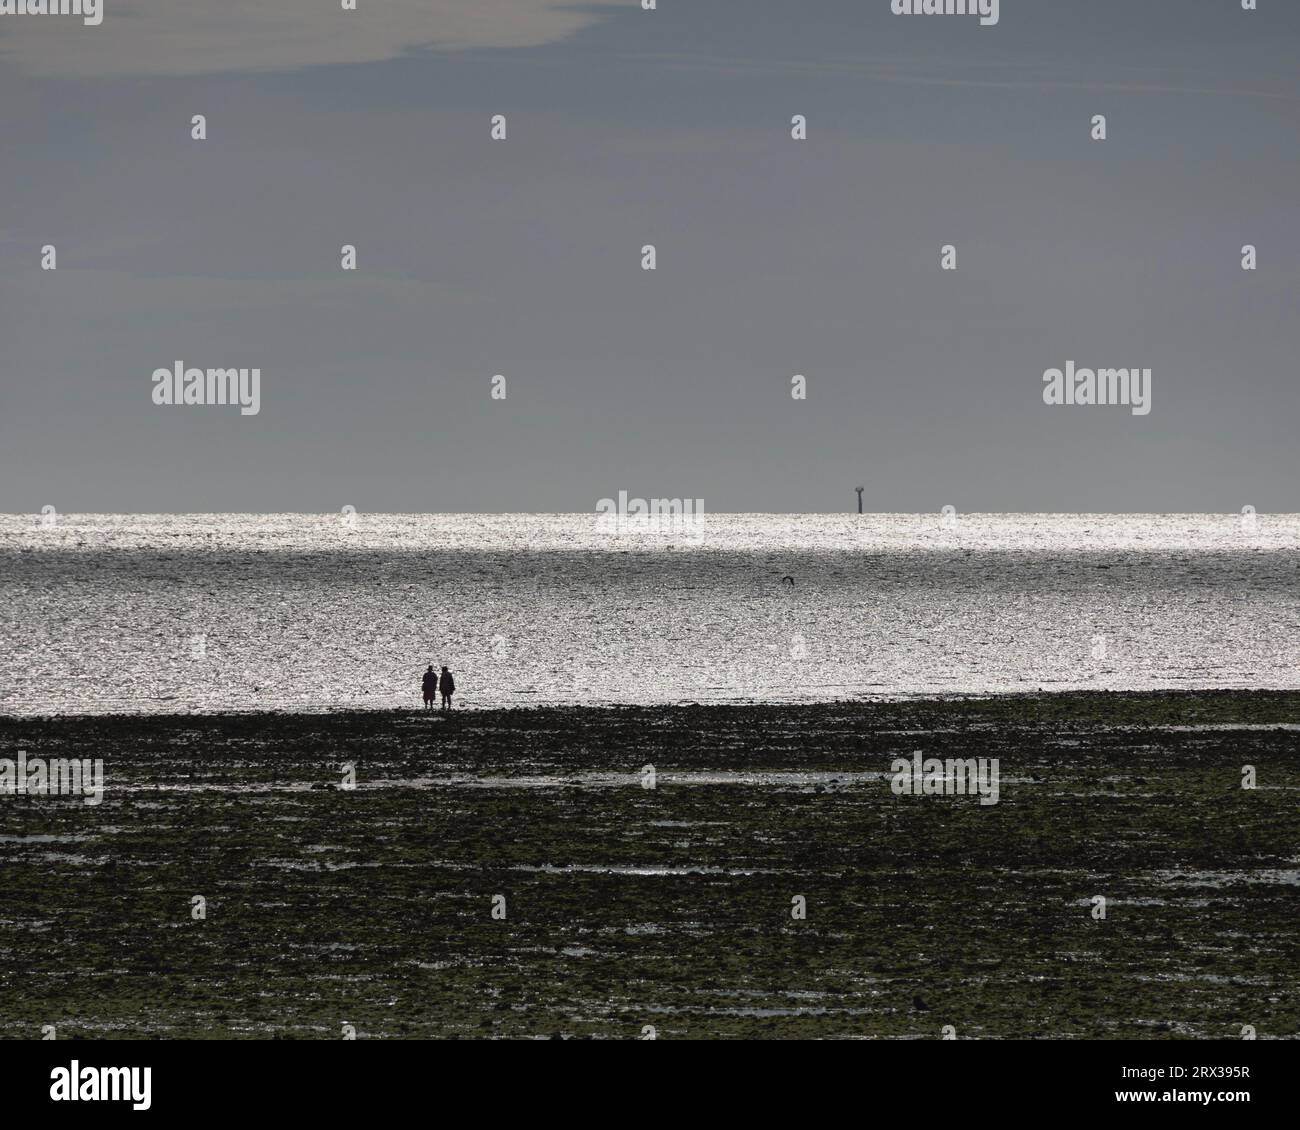 Two people in silhouette walking along the beach at low tide in Worthing, West Sussex, UK Stock Photo